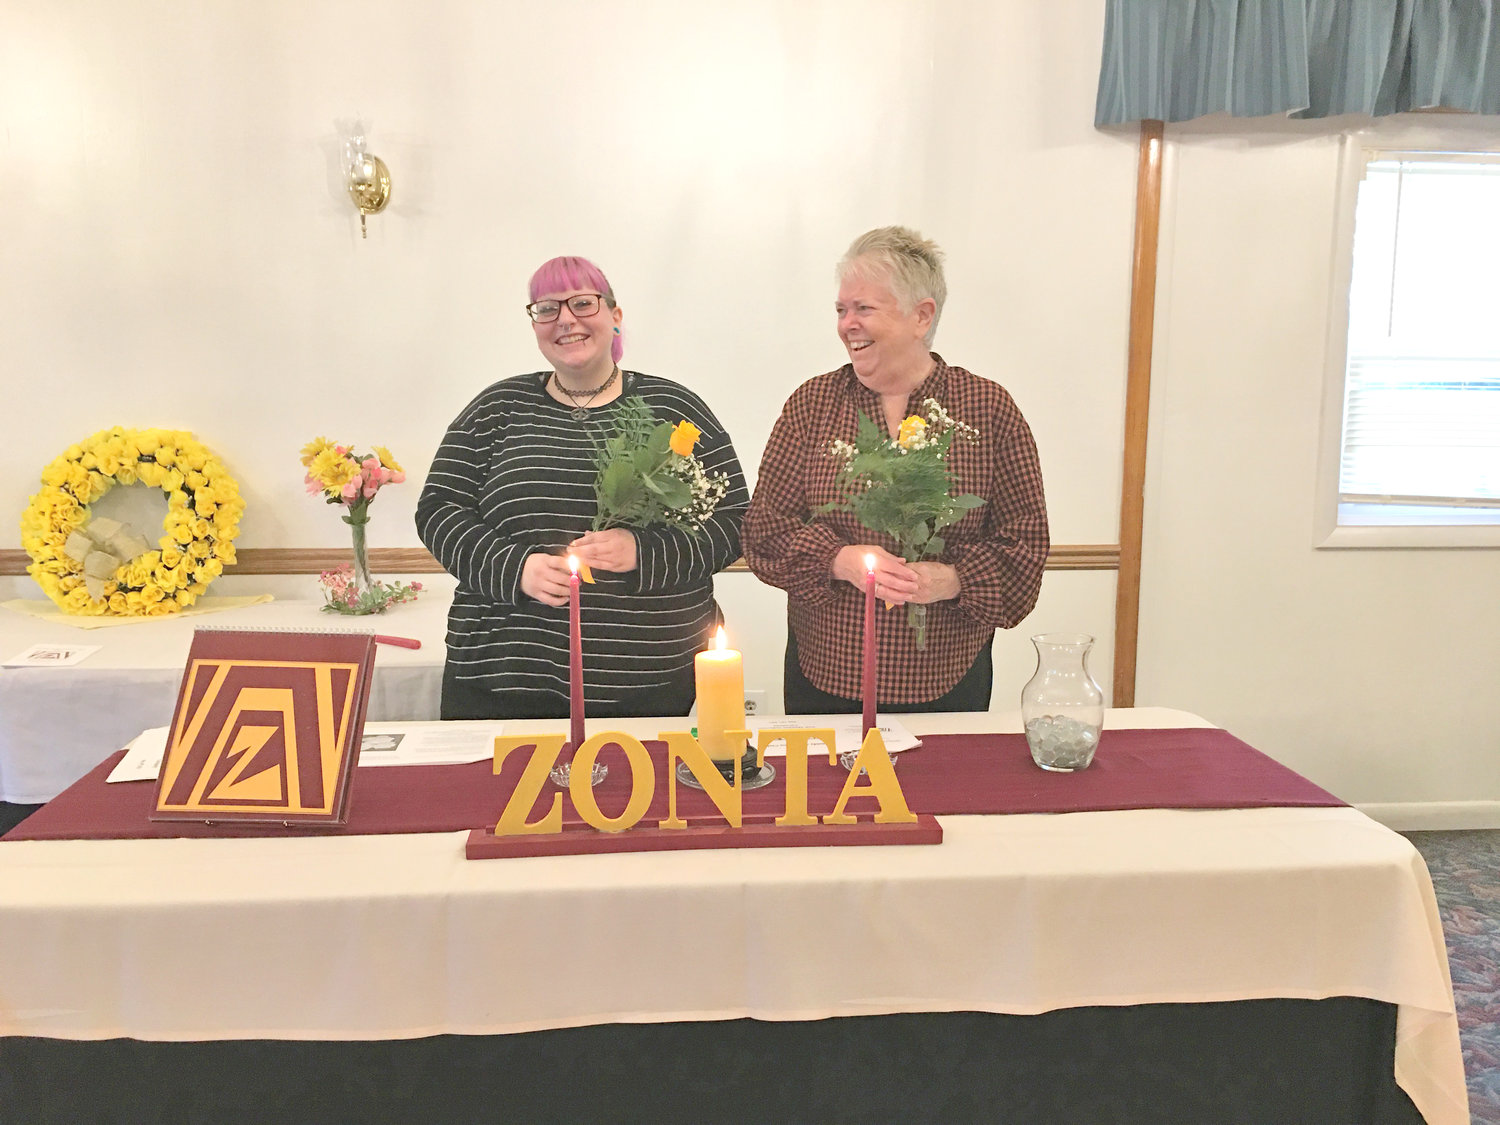 NEW MEMBERS — The Zonta Club of the Oneida Area welcomed two new members to its chapter during their recent spring meeting. From left: Mazie Osborne, and Peggy Dryer.